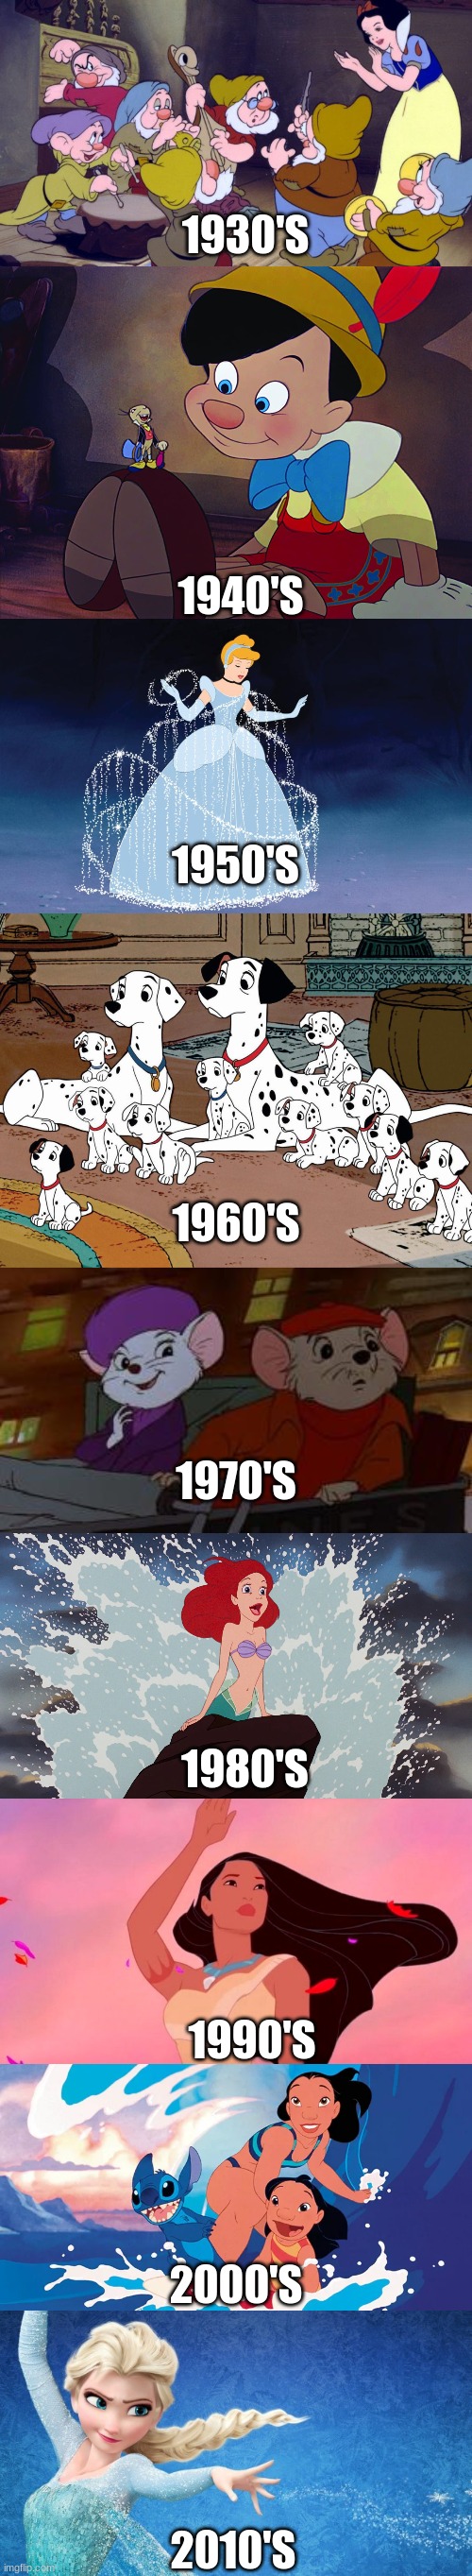 Animated Disney movies throughout the decades | 1940'S; 1930'S; 1950'S; 1960'S; 1970'S; 1980'S; 1990'S; 2000'S; 2010'S | image tagged in memes,throwback thursday,disney,movies,walt disney | made w/ Imgflip meme maker